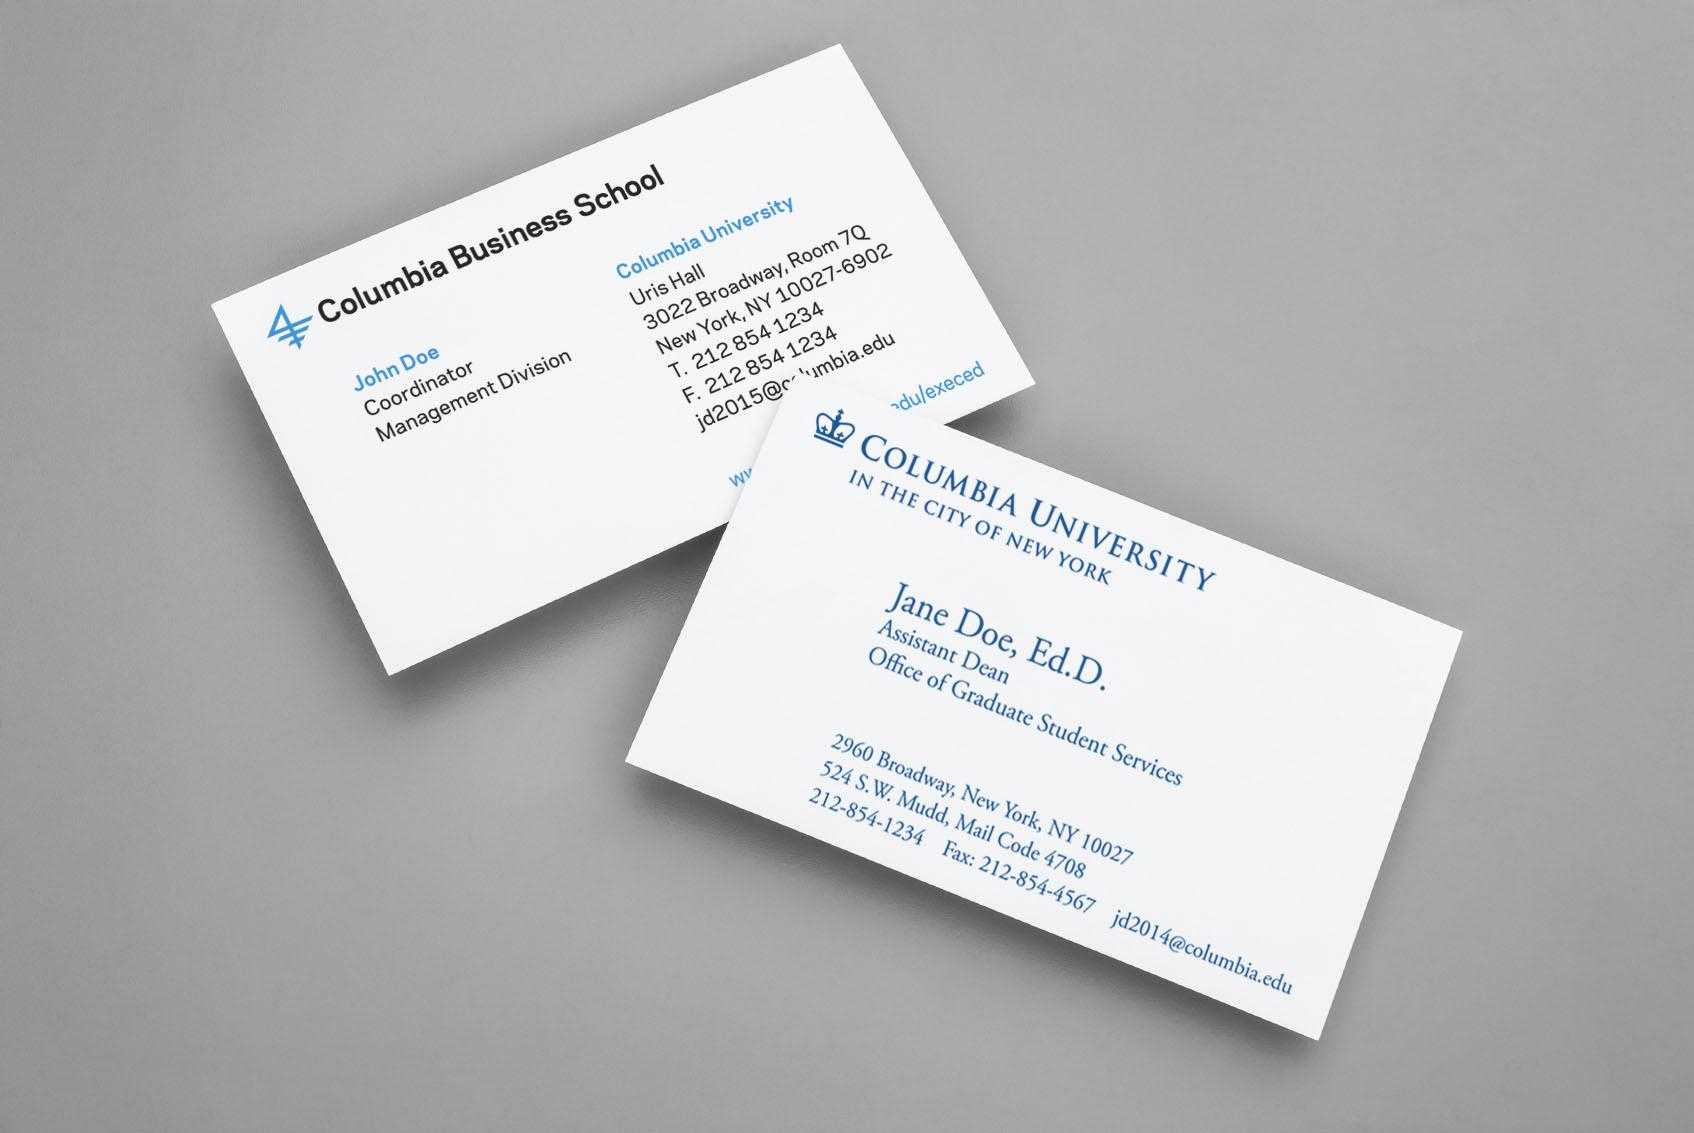 Business Cards For Teachers Templates Free Columbia Intended For Business Cards For Teachers Templates Free